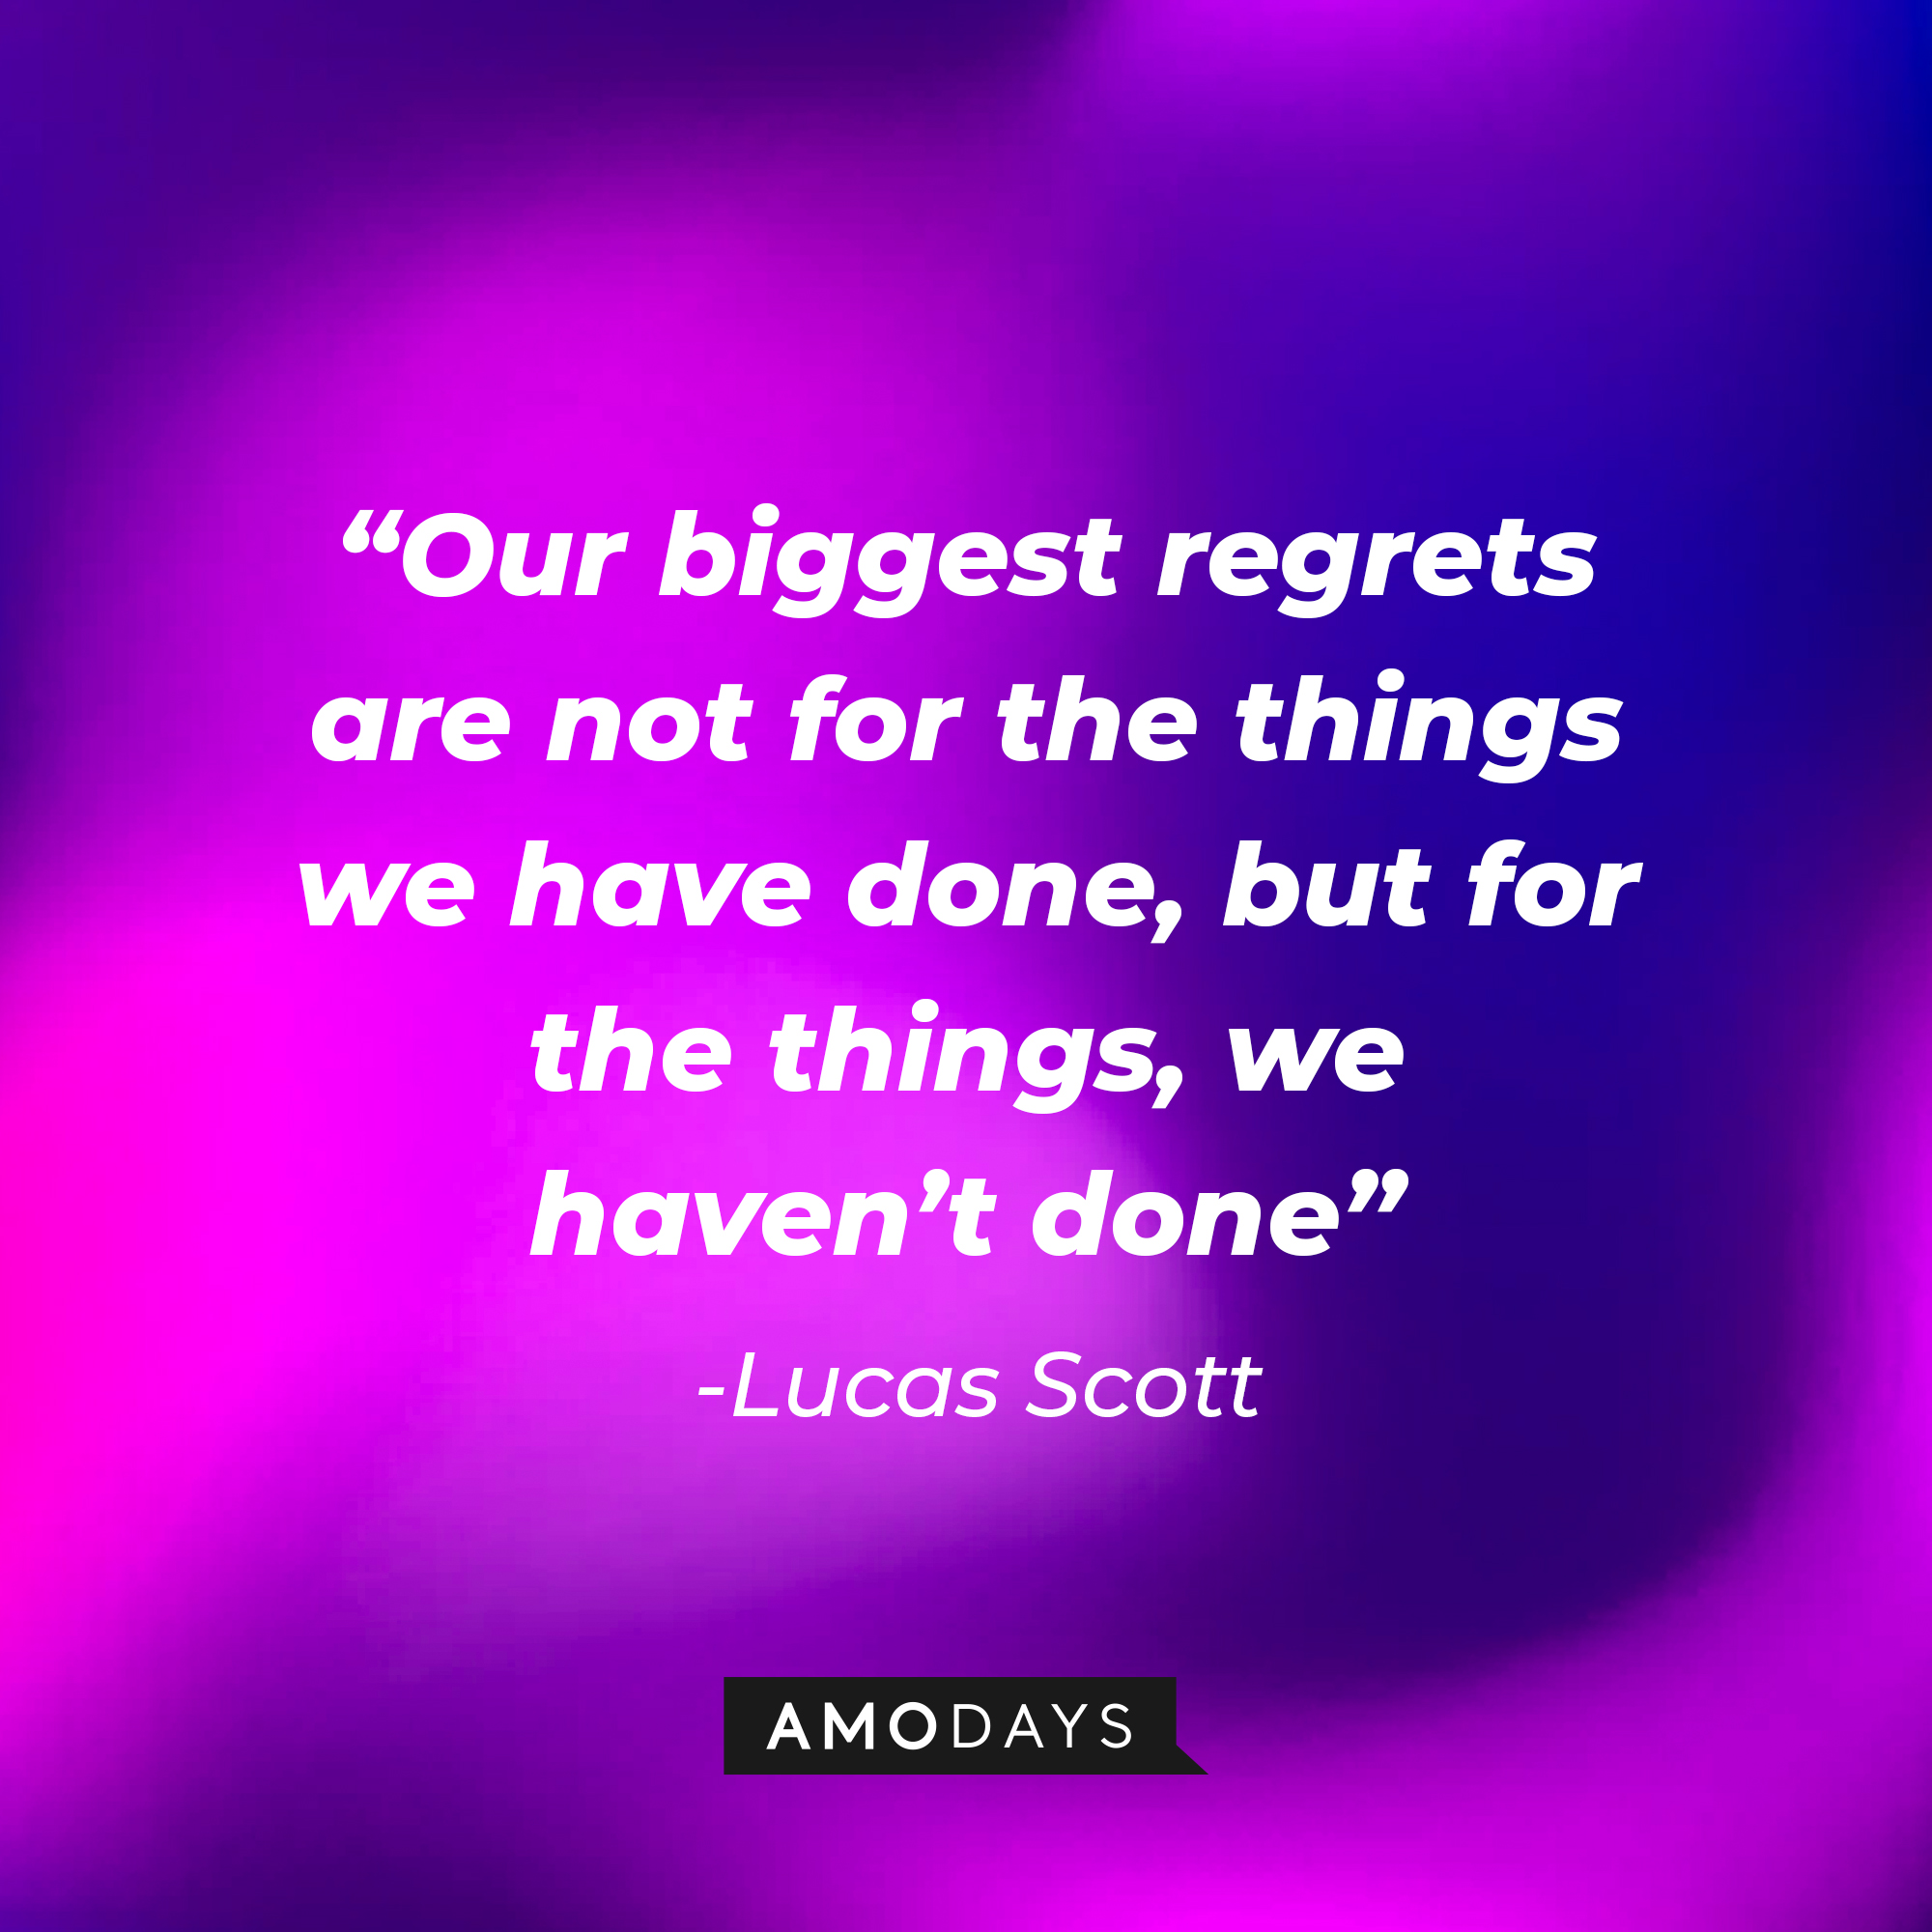 Lucas Scott’s quote: “Our biggest regrets are not for the things we have done, but for the things, we haven’t done.” | Source:facebook.com/OneTreeHill